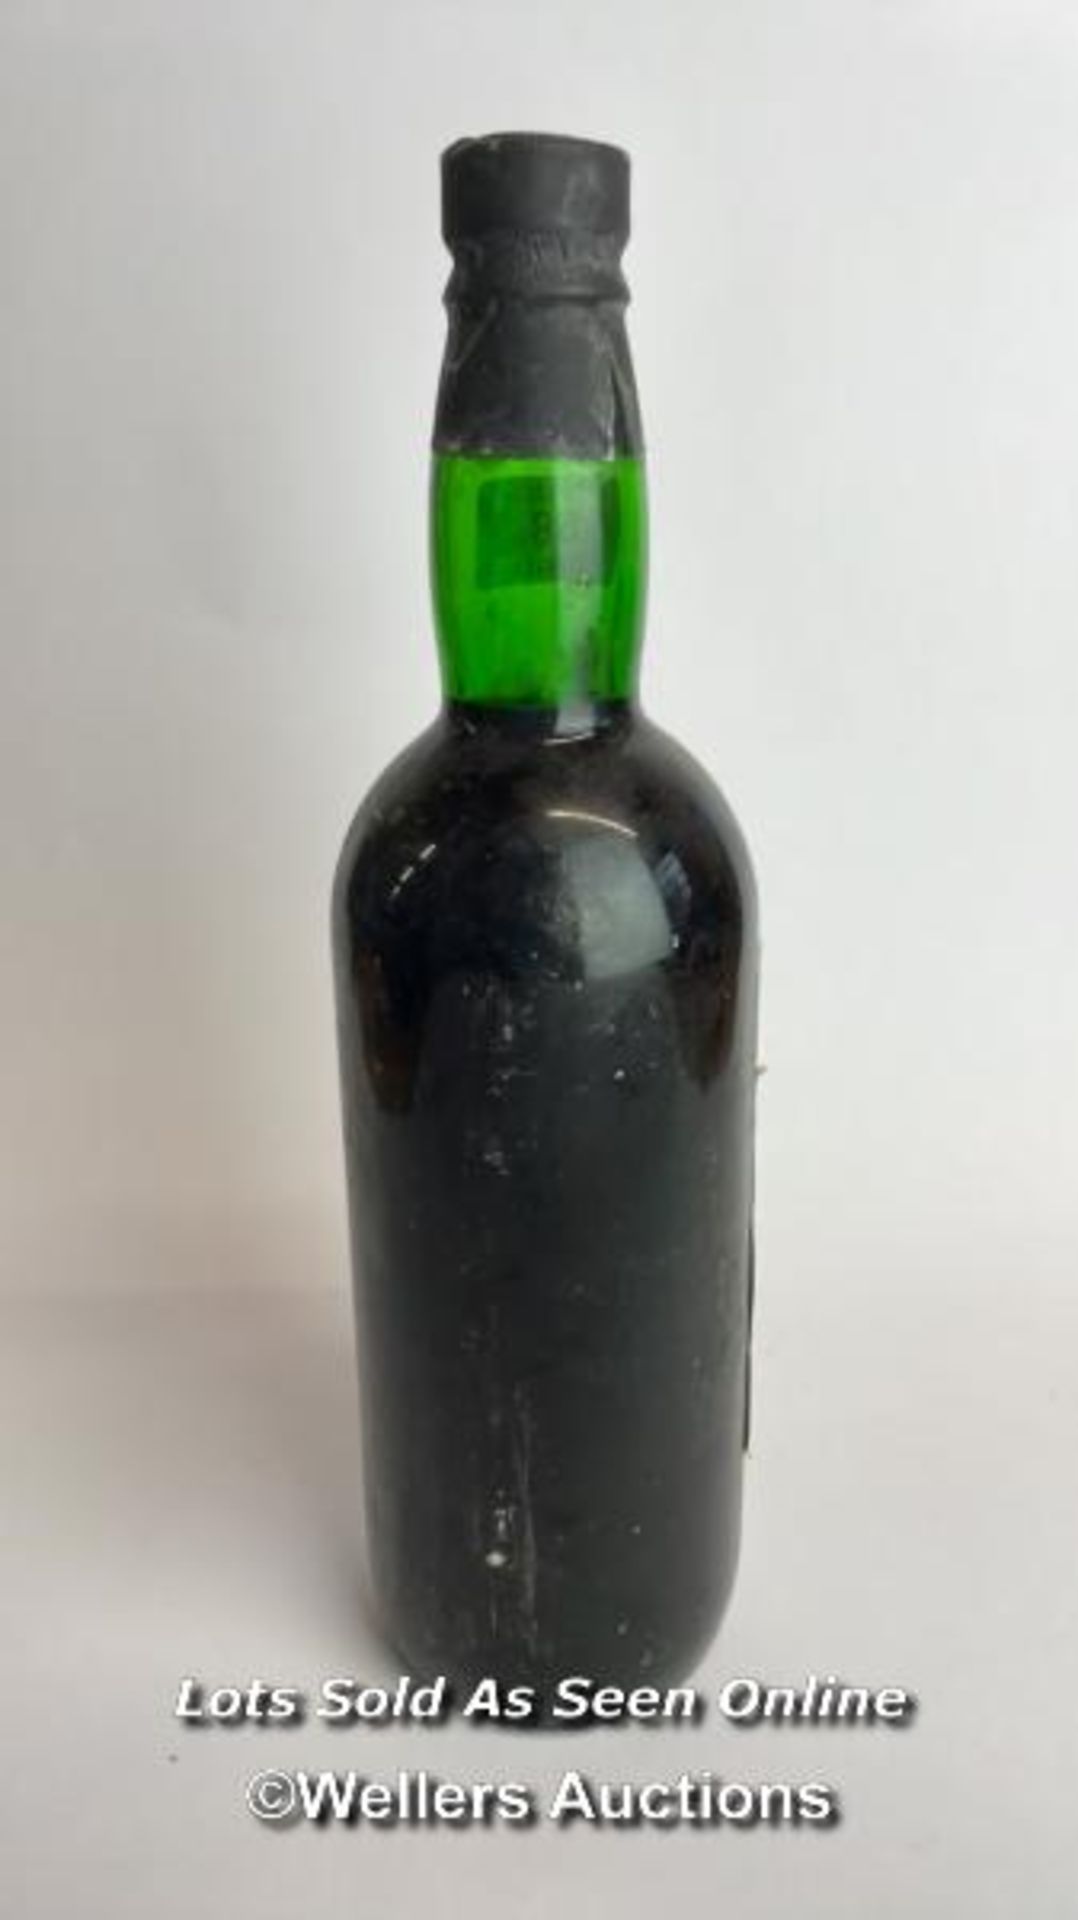 1973 Fonesca's Finest Crusting Port, 26 fl oz / Please see images for fill level and general - Image 6 of 6